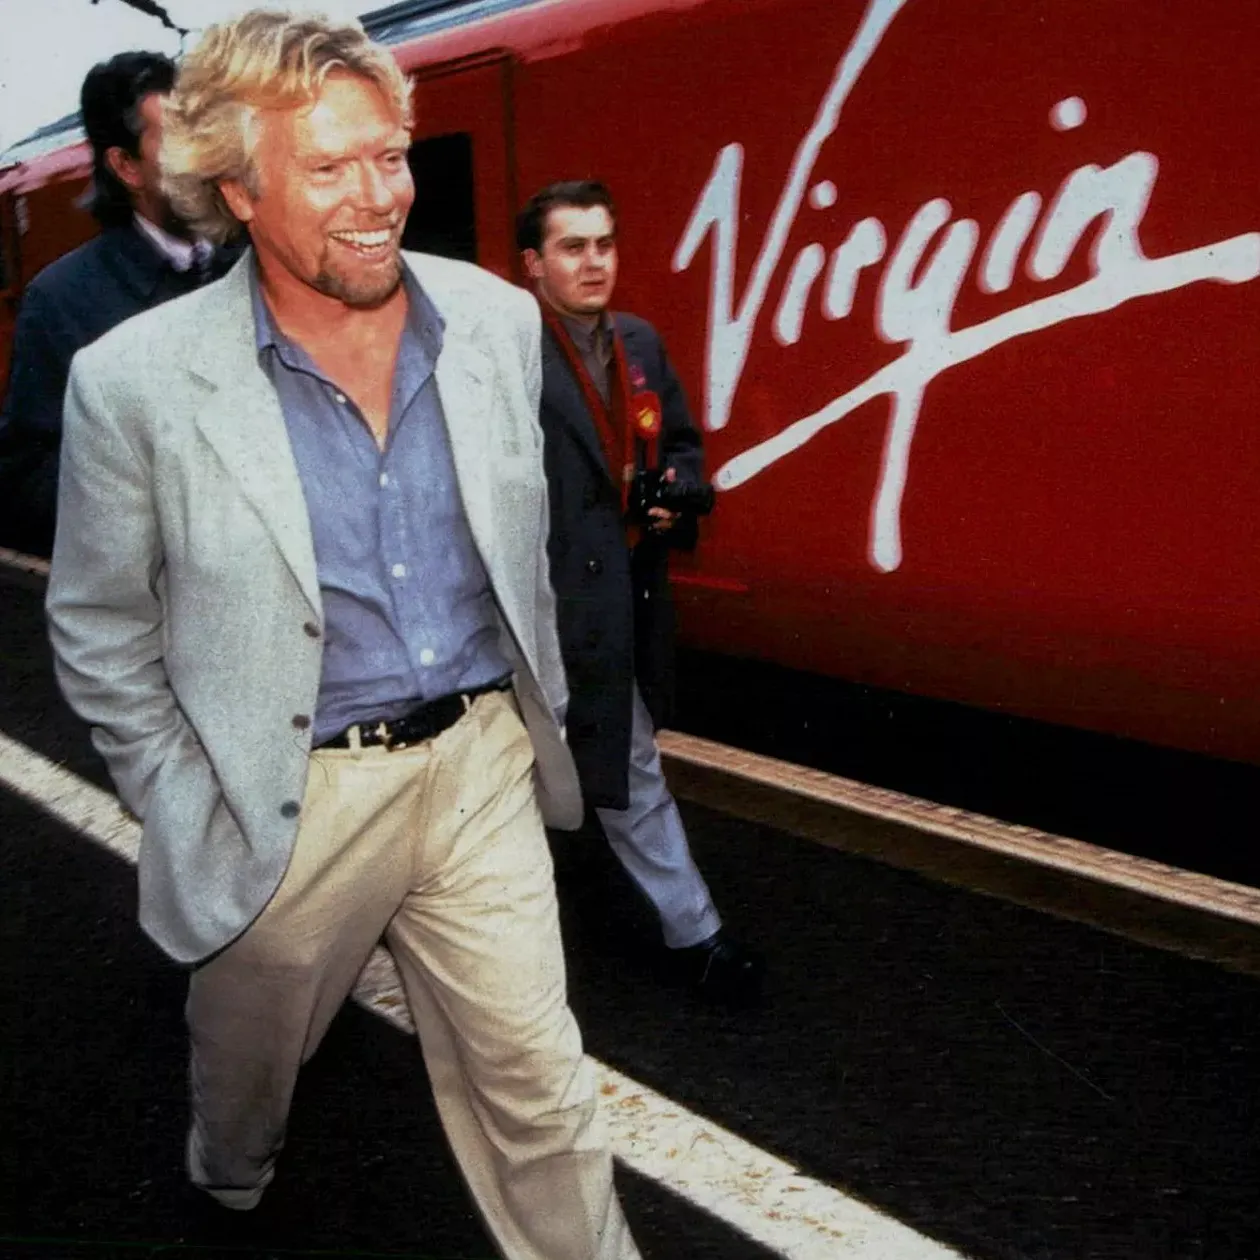 Richard Branson smiling with his hands in his pockets walking alongside a Virgin Train